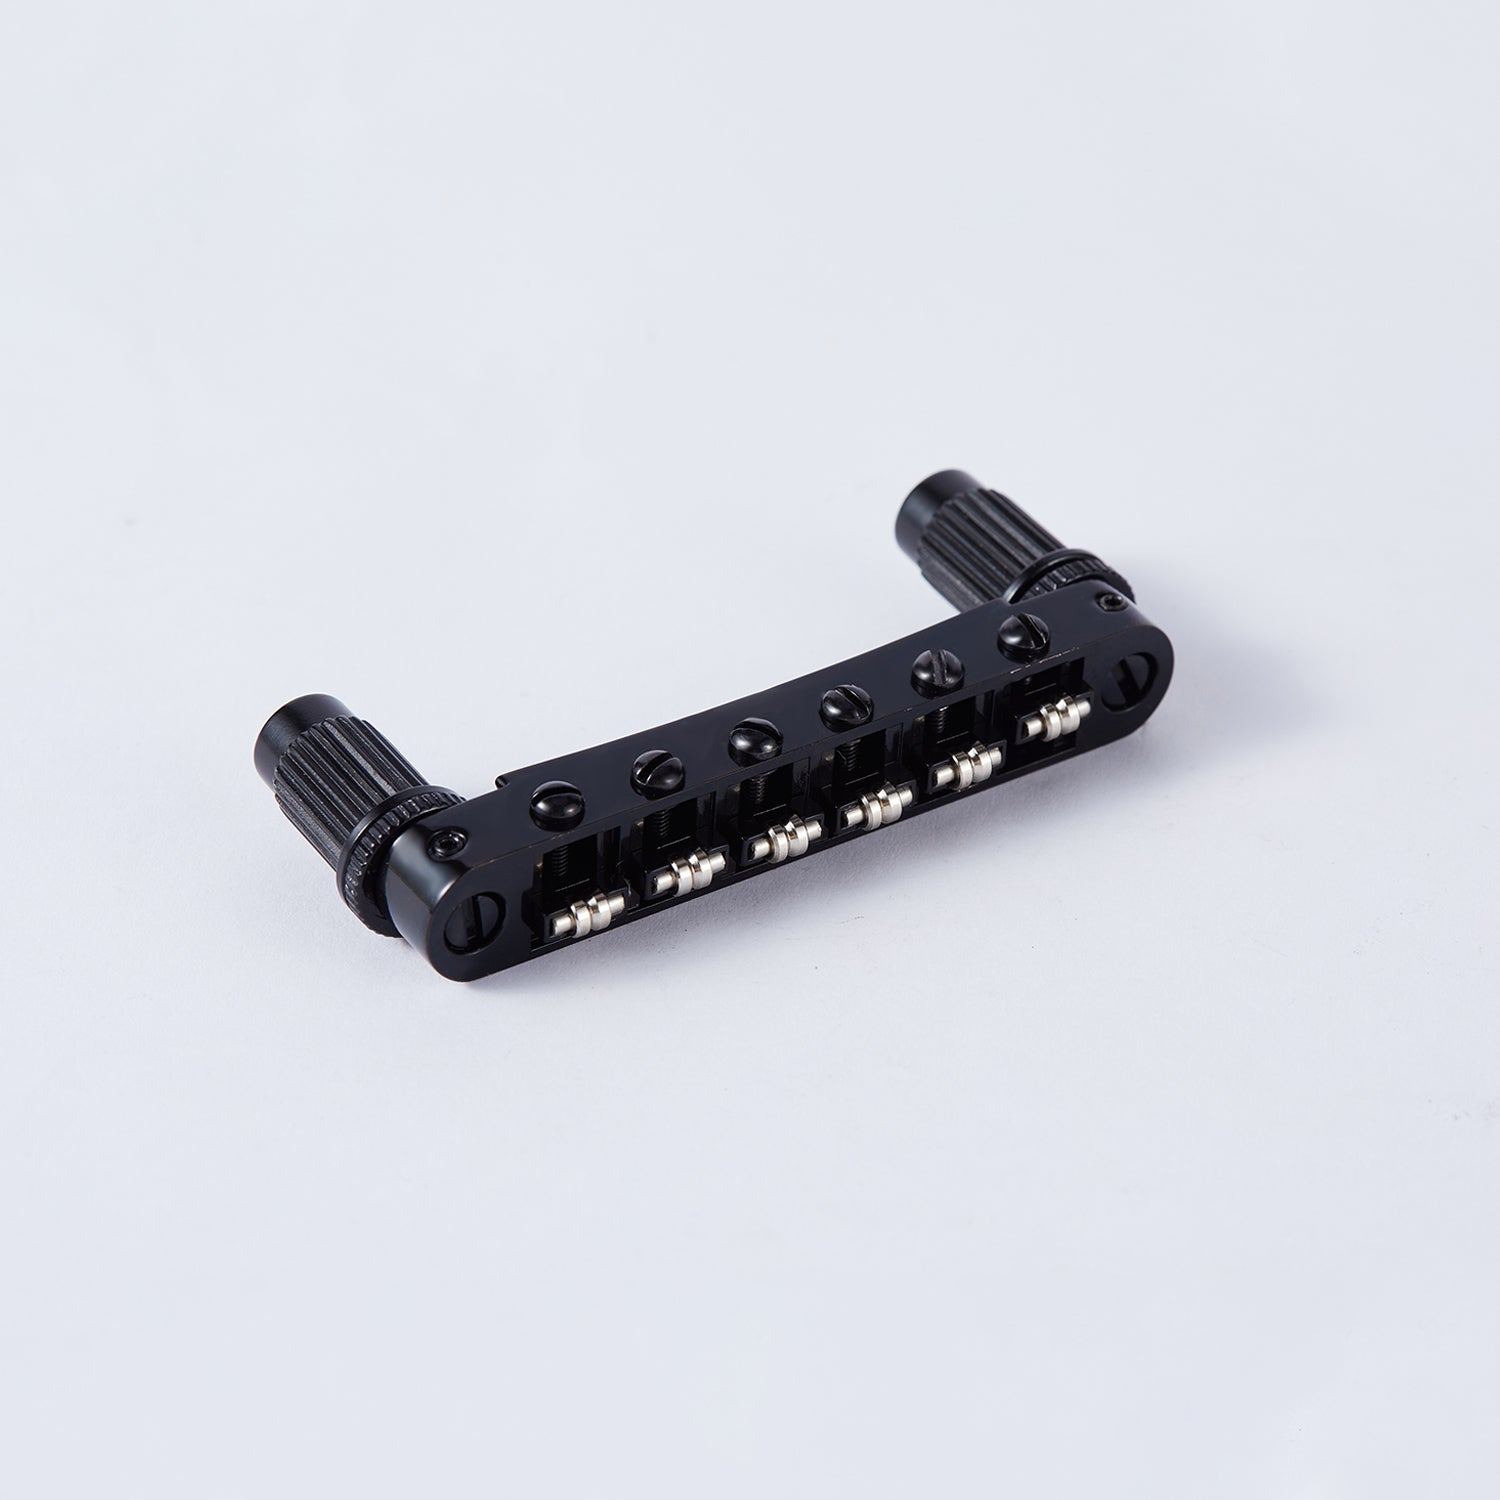 Guyker Guitar Tune-O-Matic Bridge and Stop Bar Tailpiece Combo Replacement Compatible with LP SG EPI 6 String Electric Guitar